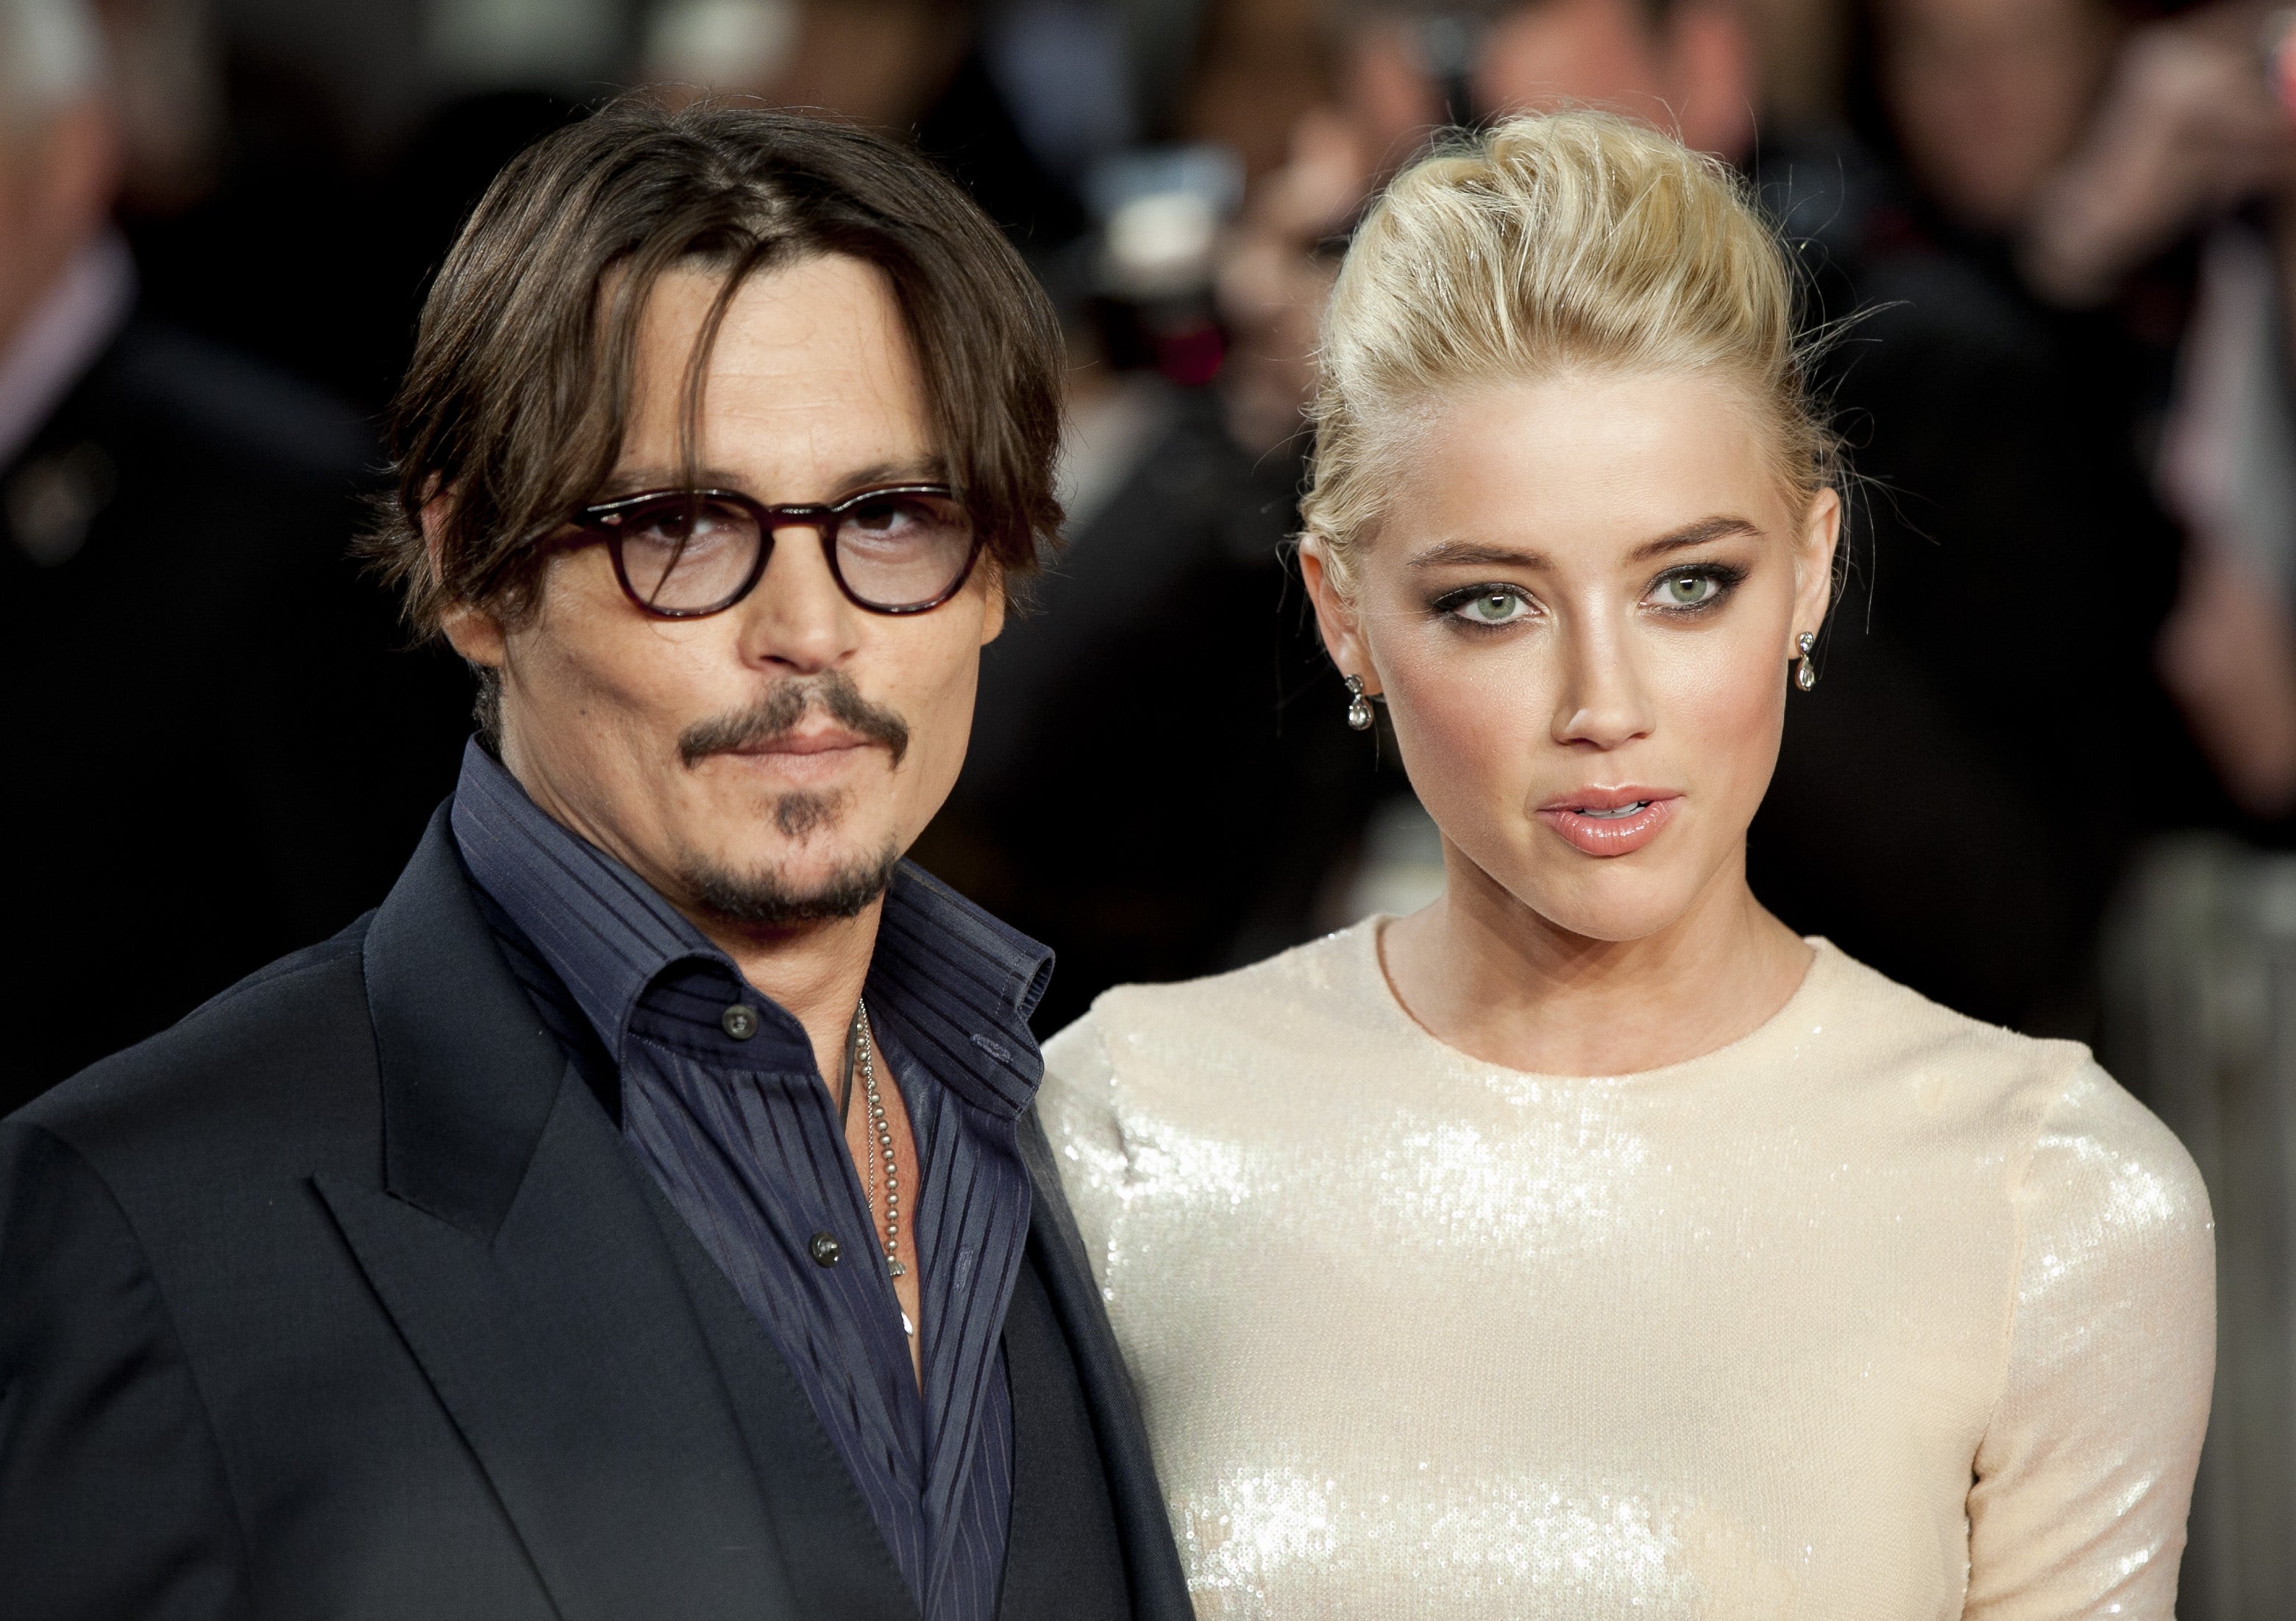 Johnny Depp responds to Amber Heard’s claim wrong juror was seated